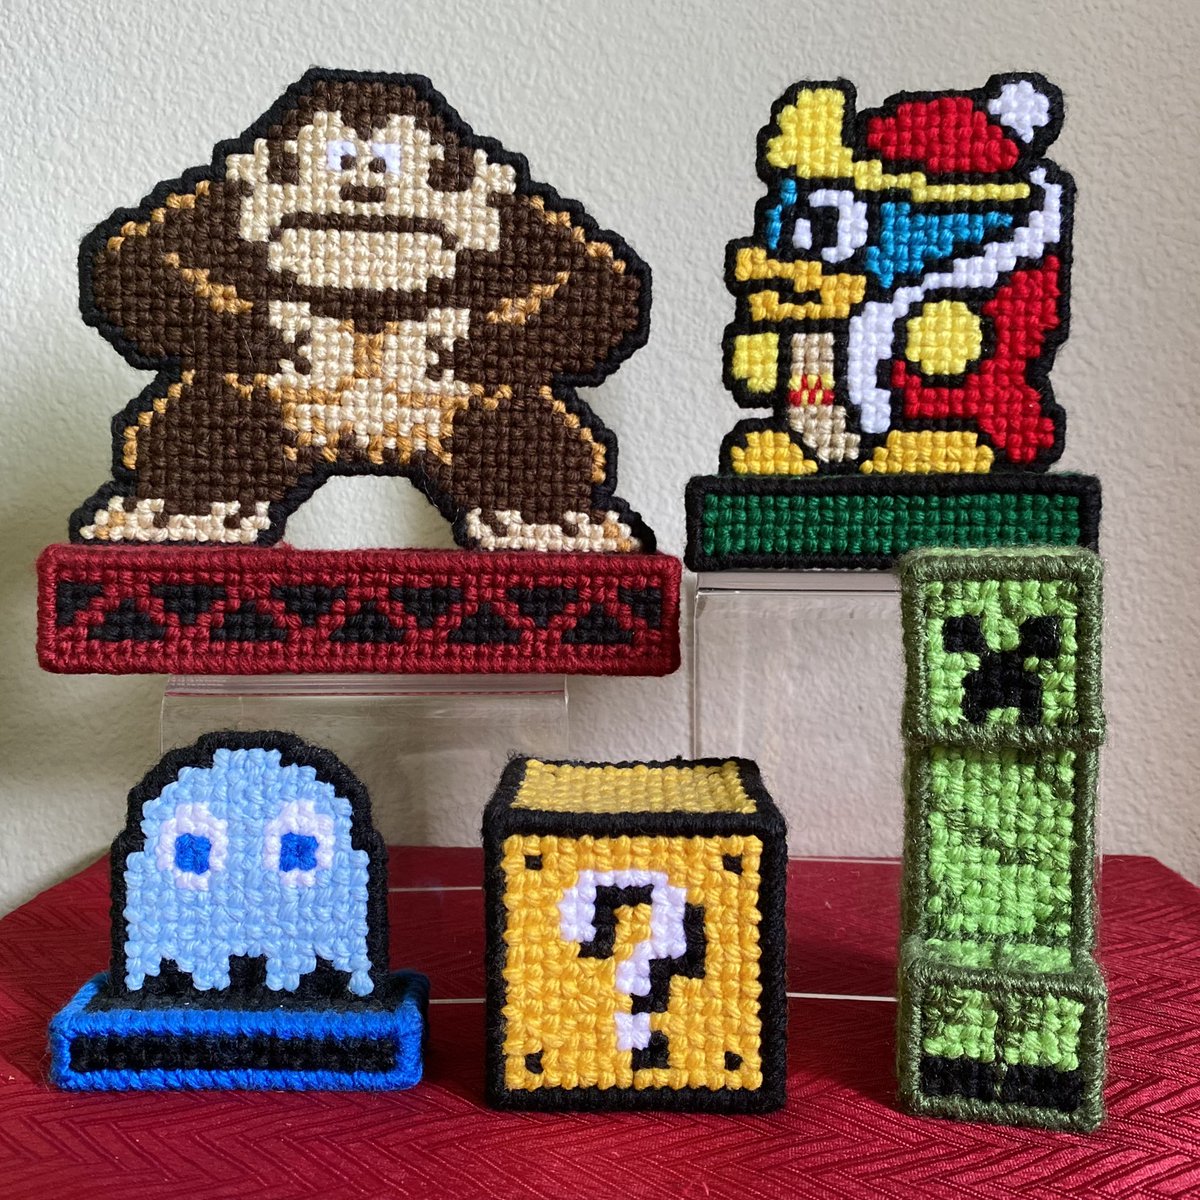 Happy #NationalVideoGameDay!
Starting today & continuing through the weekend, use code VGDAY2021 to get 15% off all #videogame related products!

justaskcassie.square.site

#retrogaming #nintendogames #mincraft #creeper #donkeykong #arcadegames #pacmanghost #kingdedede #pixelart